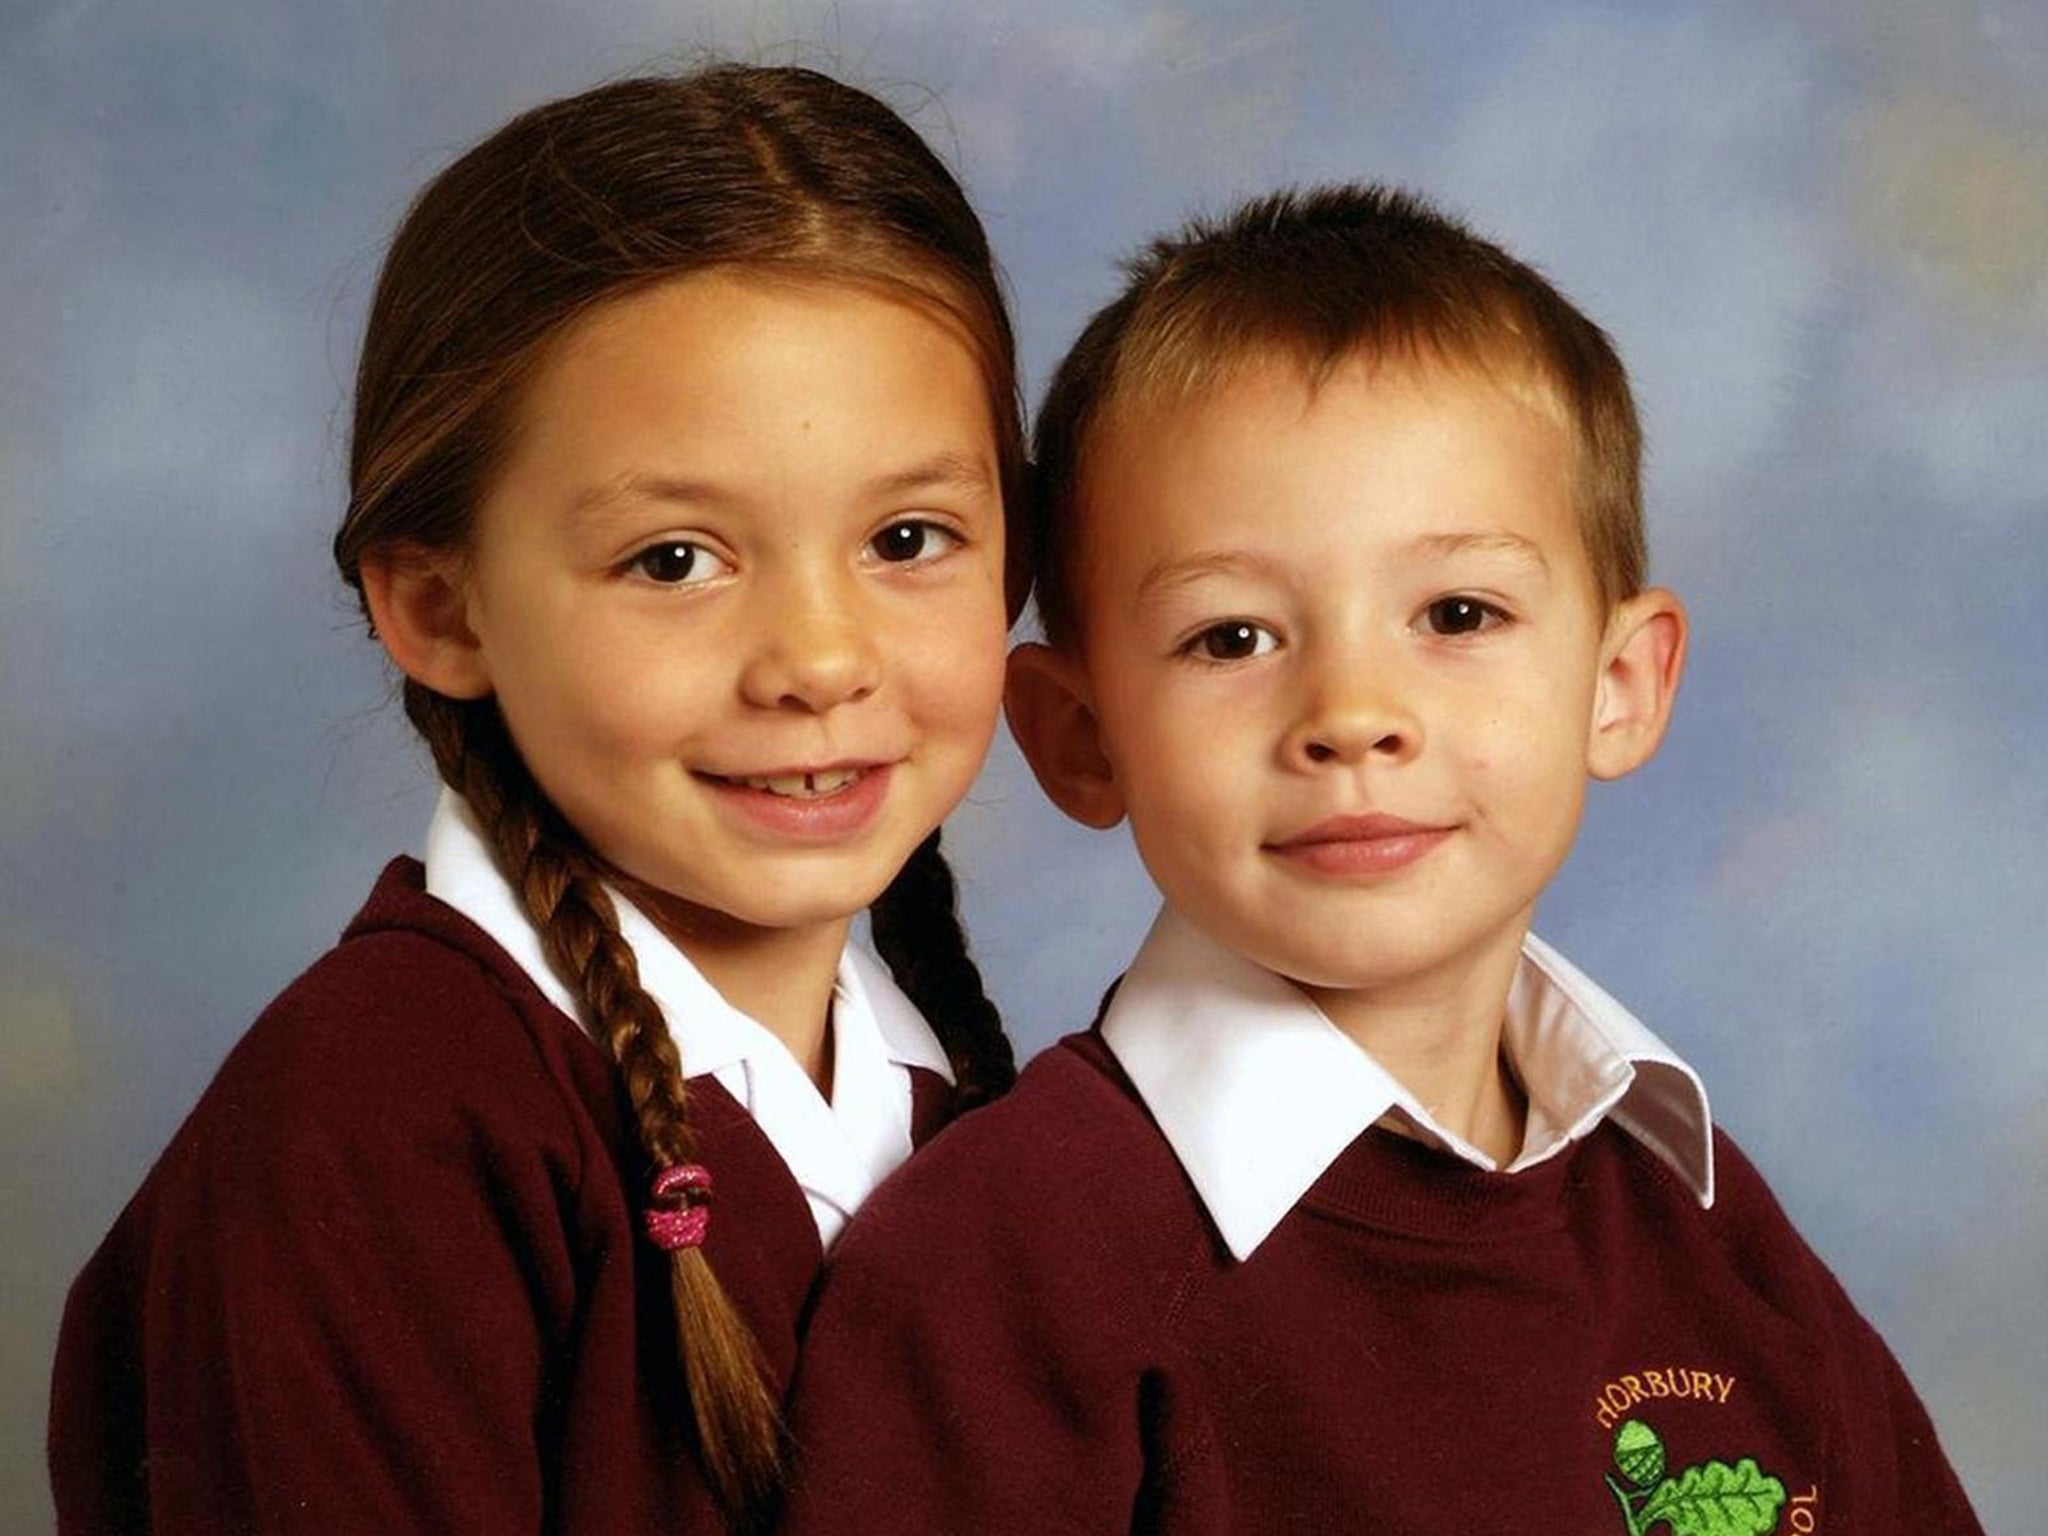 Bobbi and Christi Shepherd, who died aged six and seven